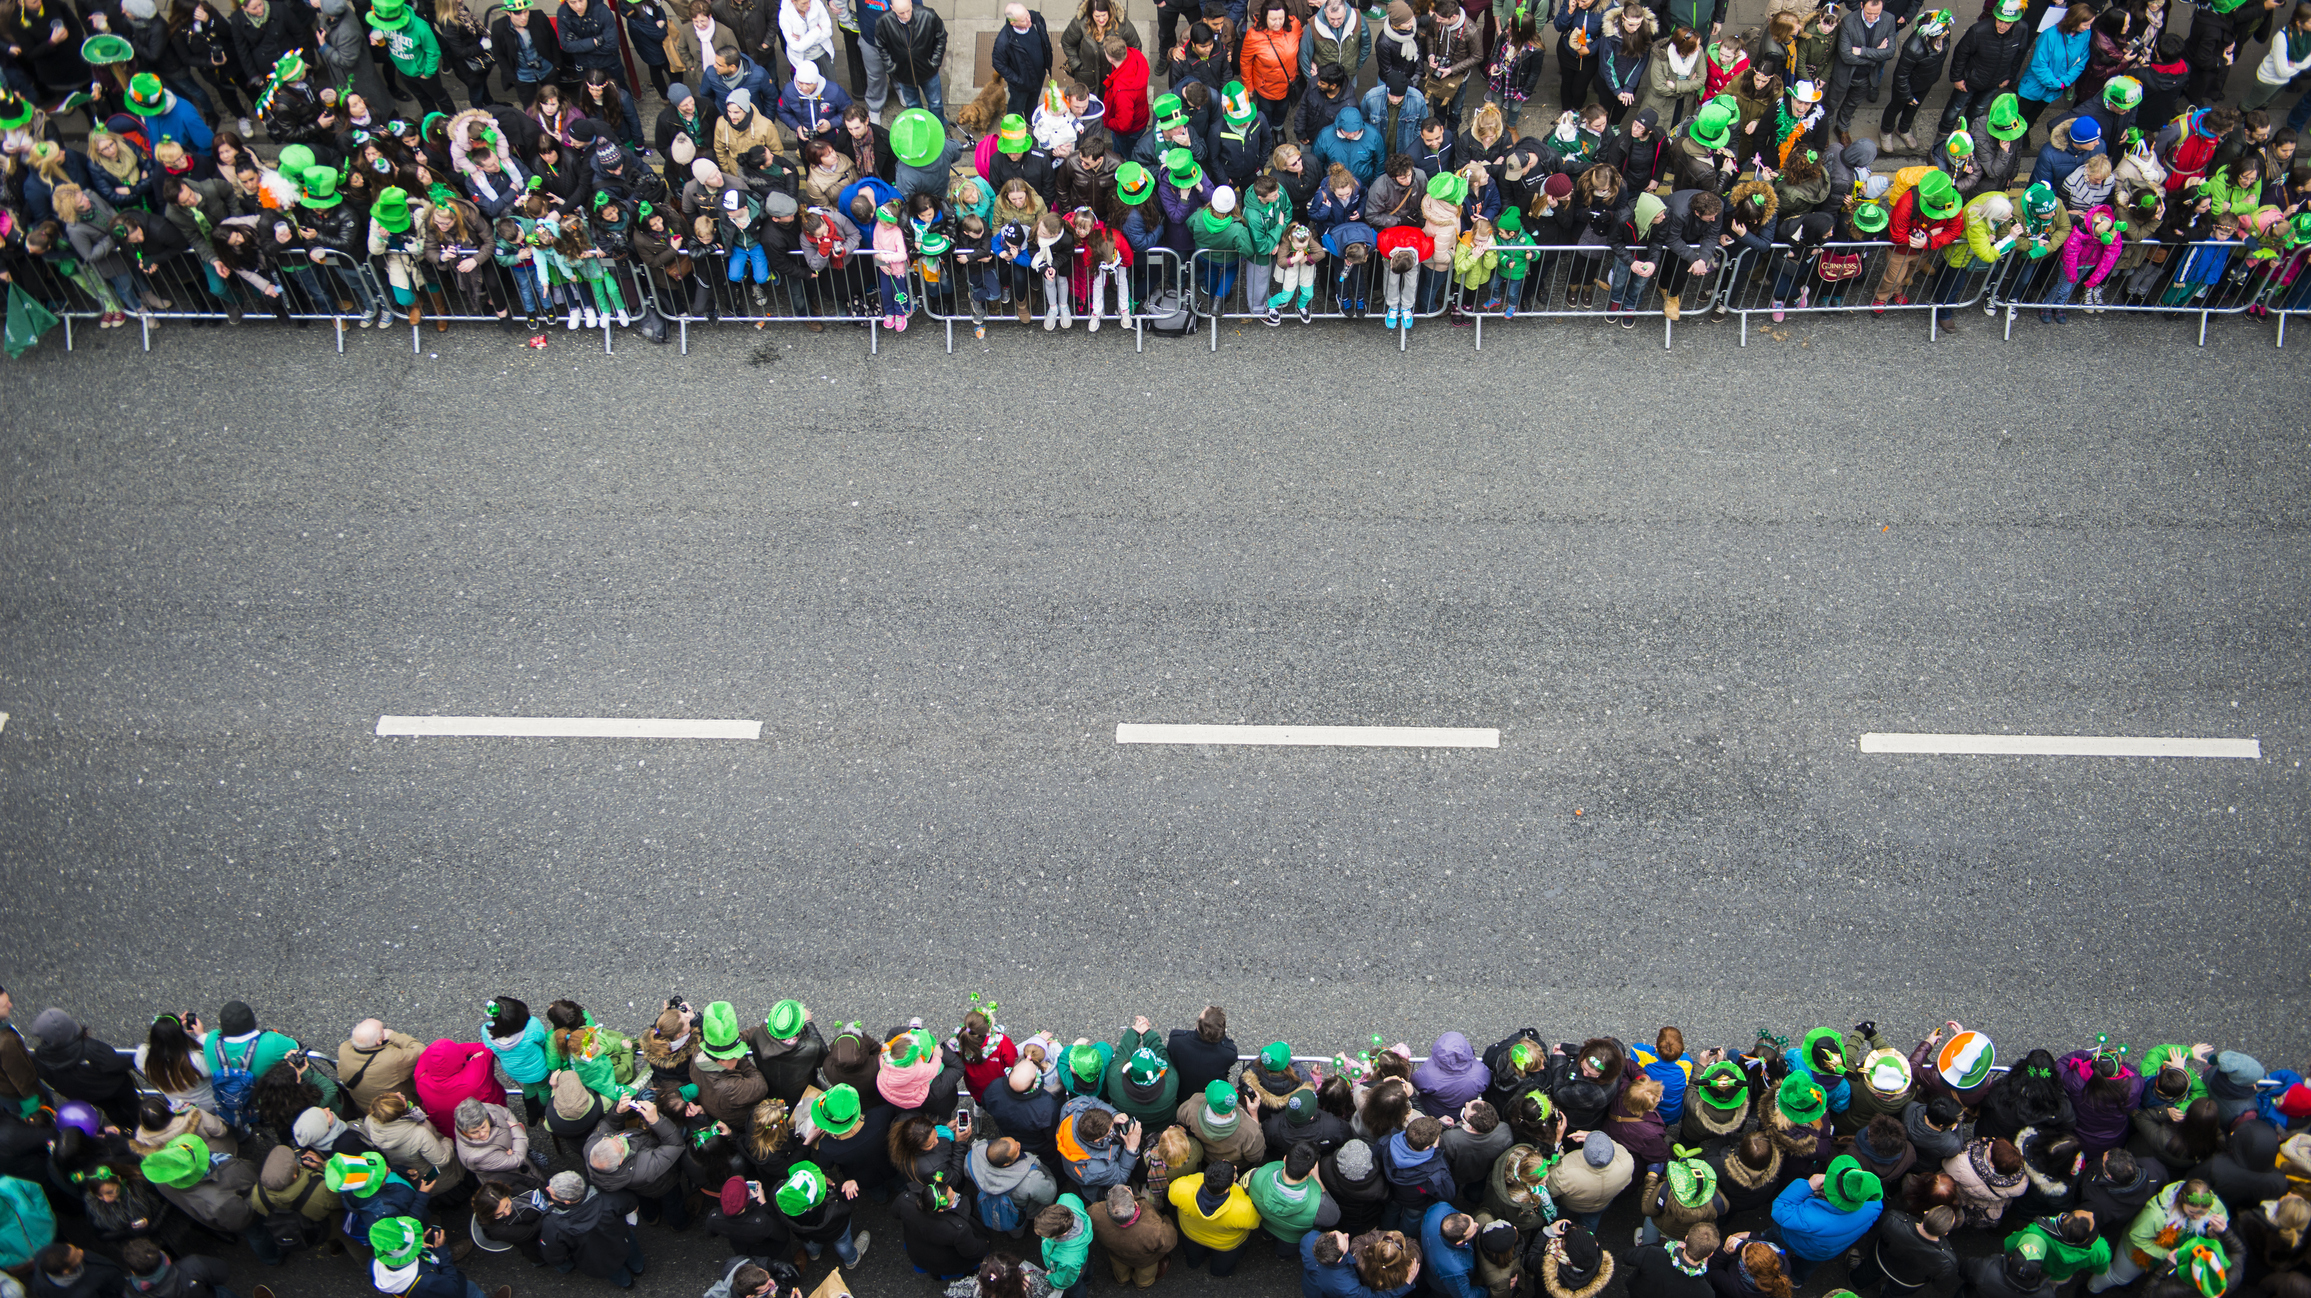 Crowds awaiting the beginning of the St. Patrick's Day Parade